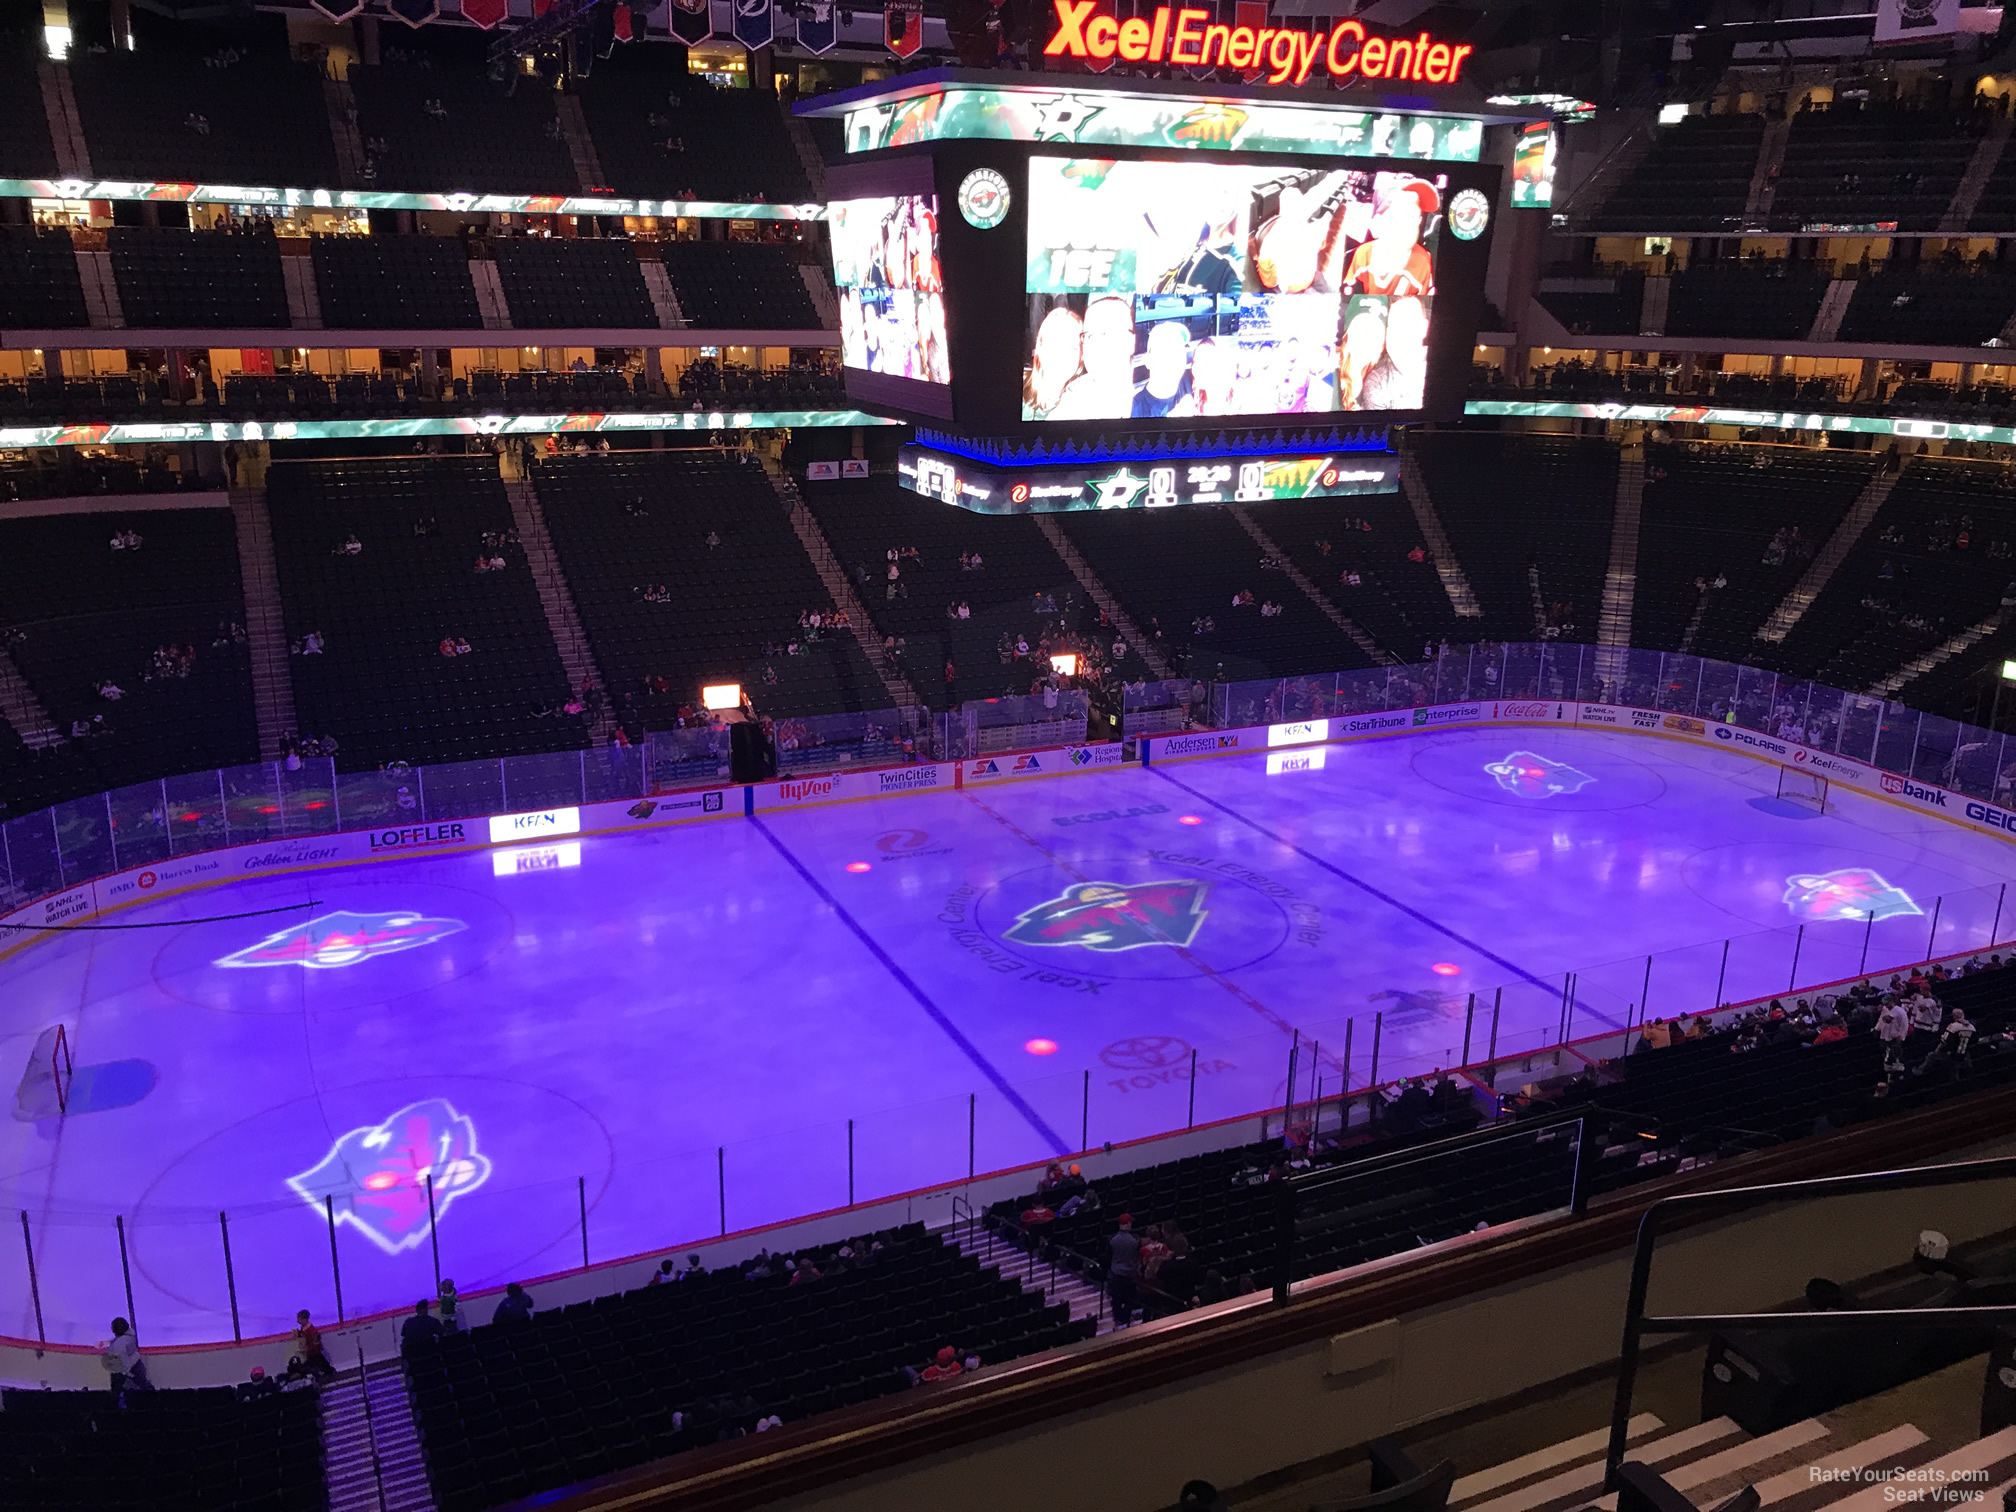 section c9, row 5 seat view  for hockey - xcel energy center